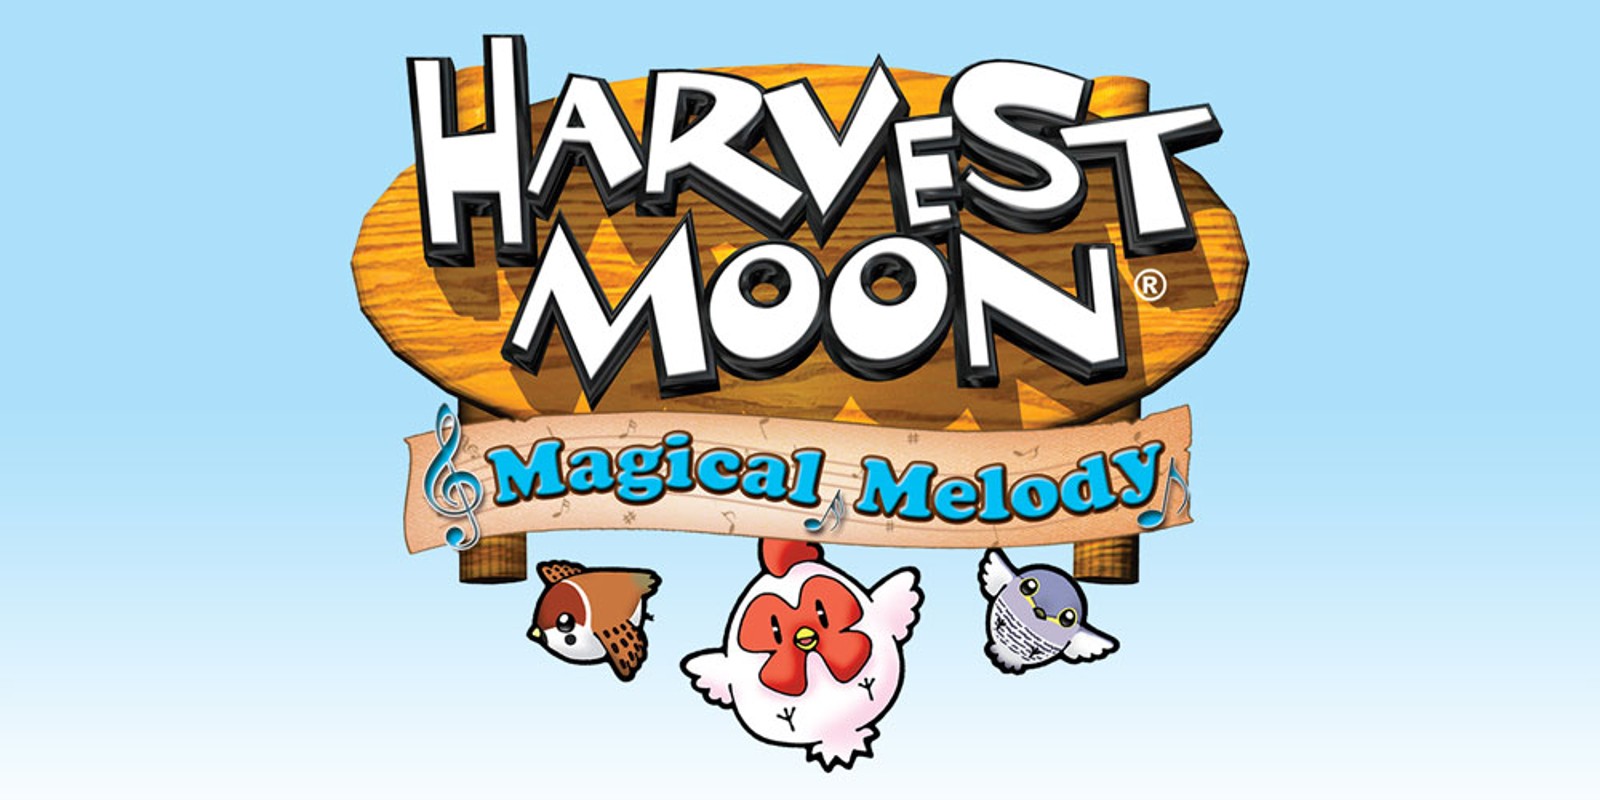 Harvest Moon: Magical Melody | Wii | Games | Nintendo